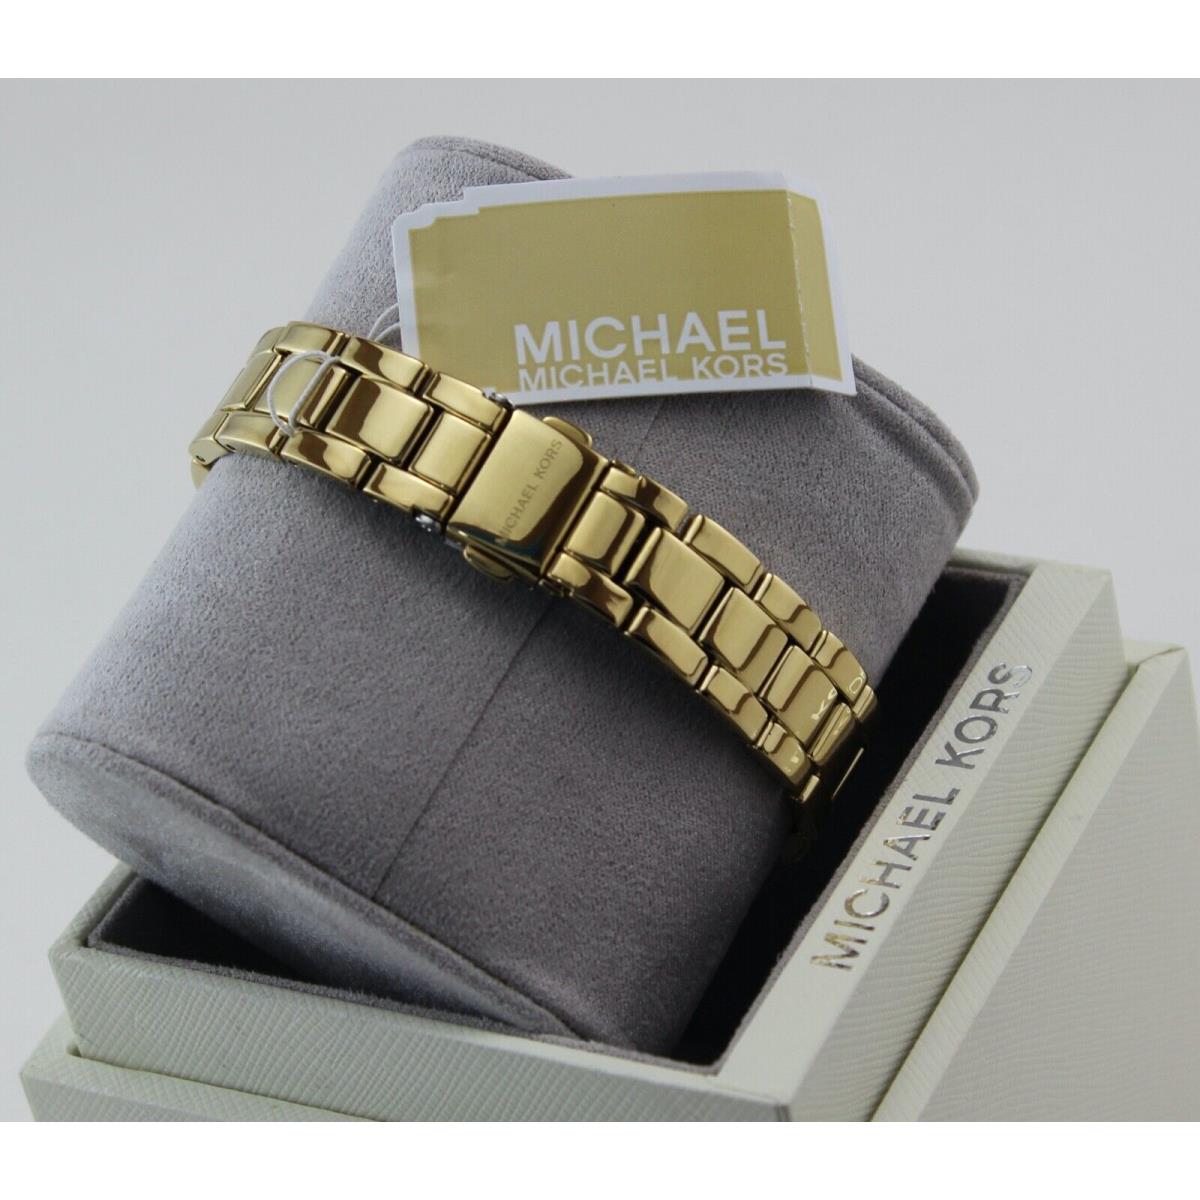 Michael Kors watch Heather - Gold Dial, Gold Band 6